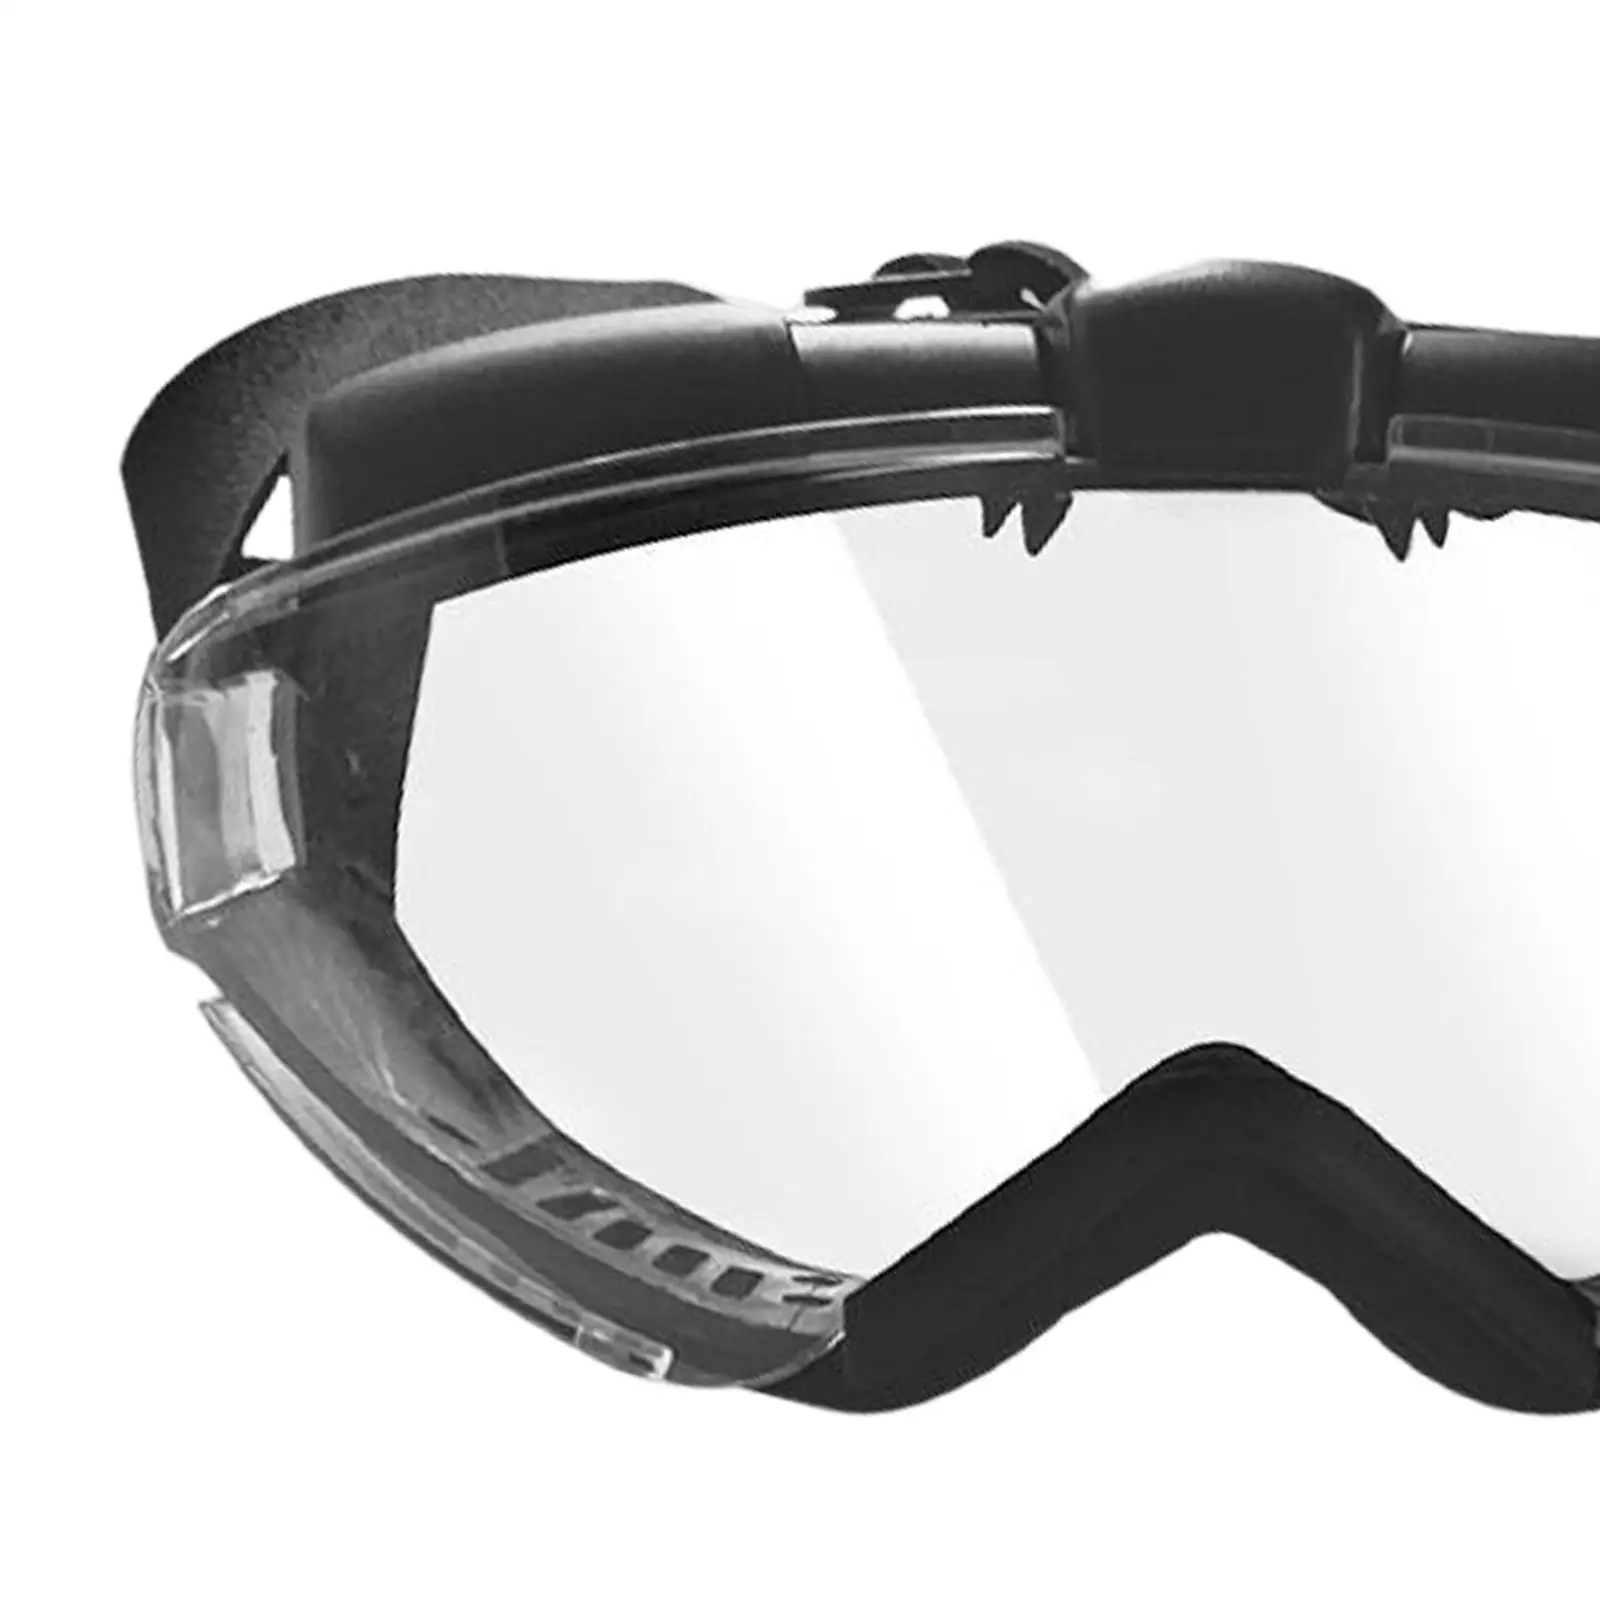 Outdoor Glasses with Adjustable Strap Dustproof for Cycling Skating Riding